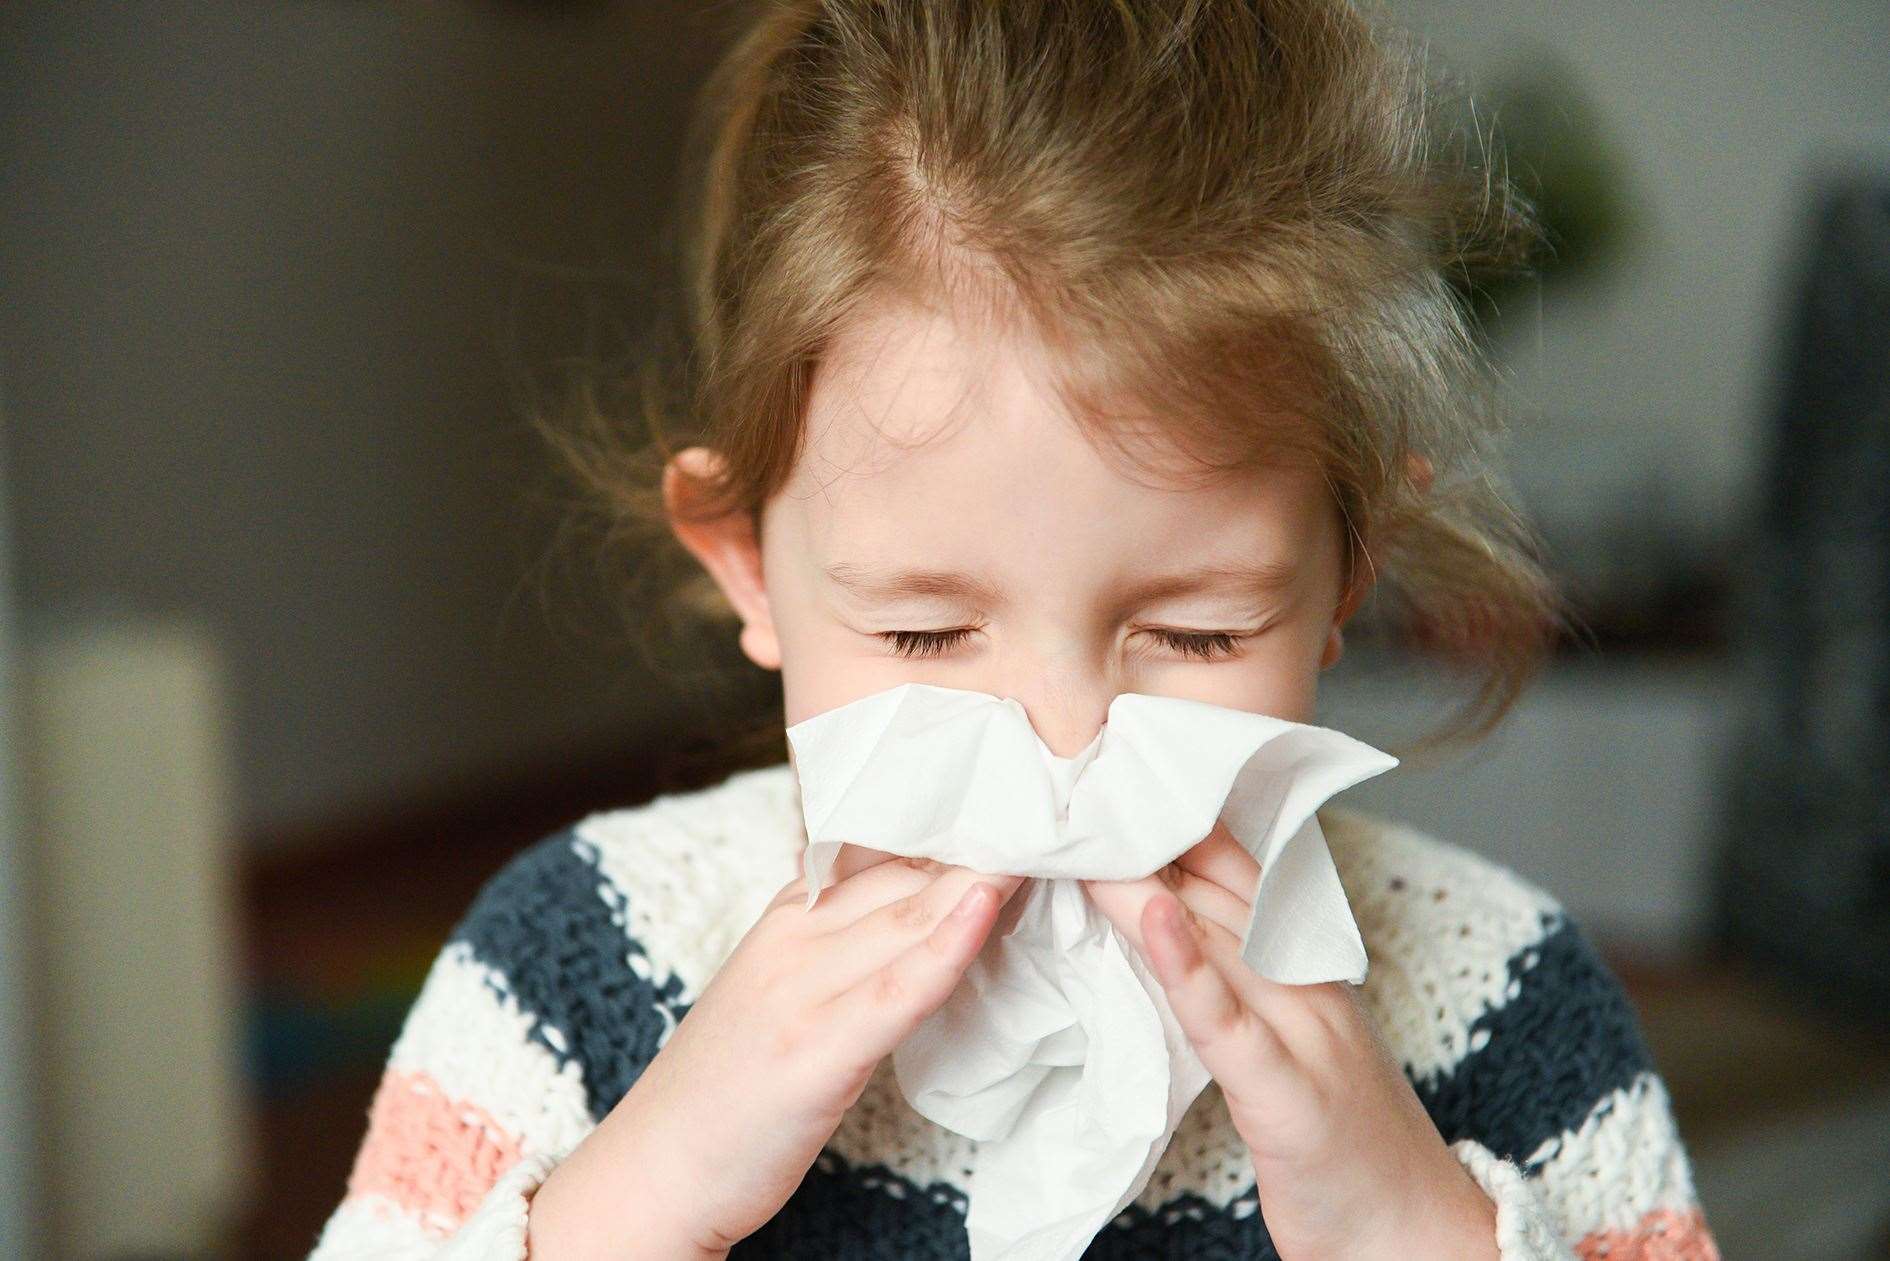 A child with a cold.